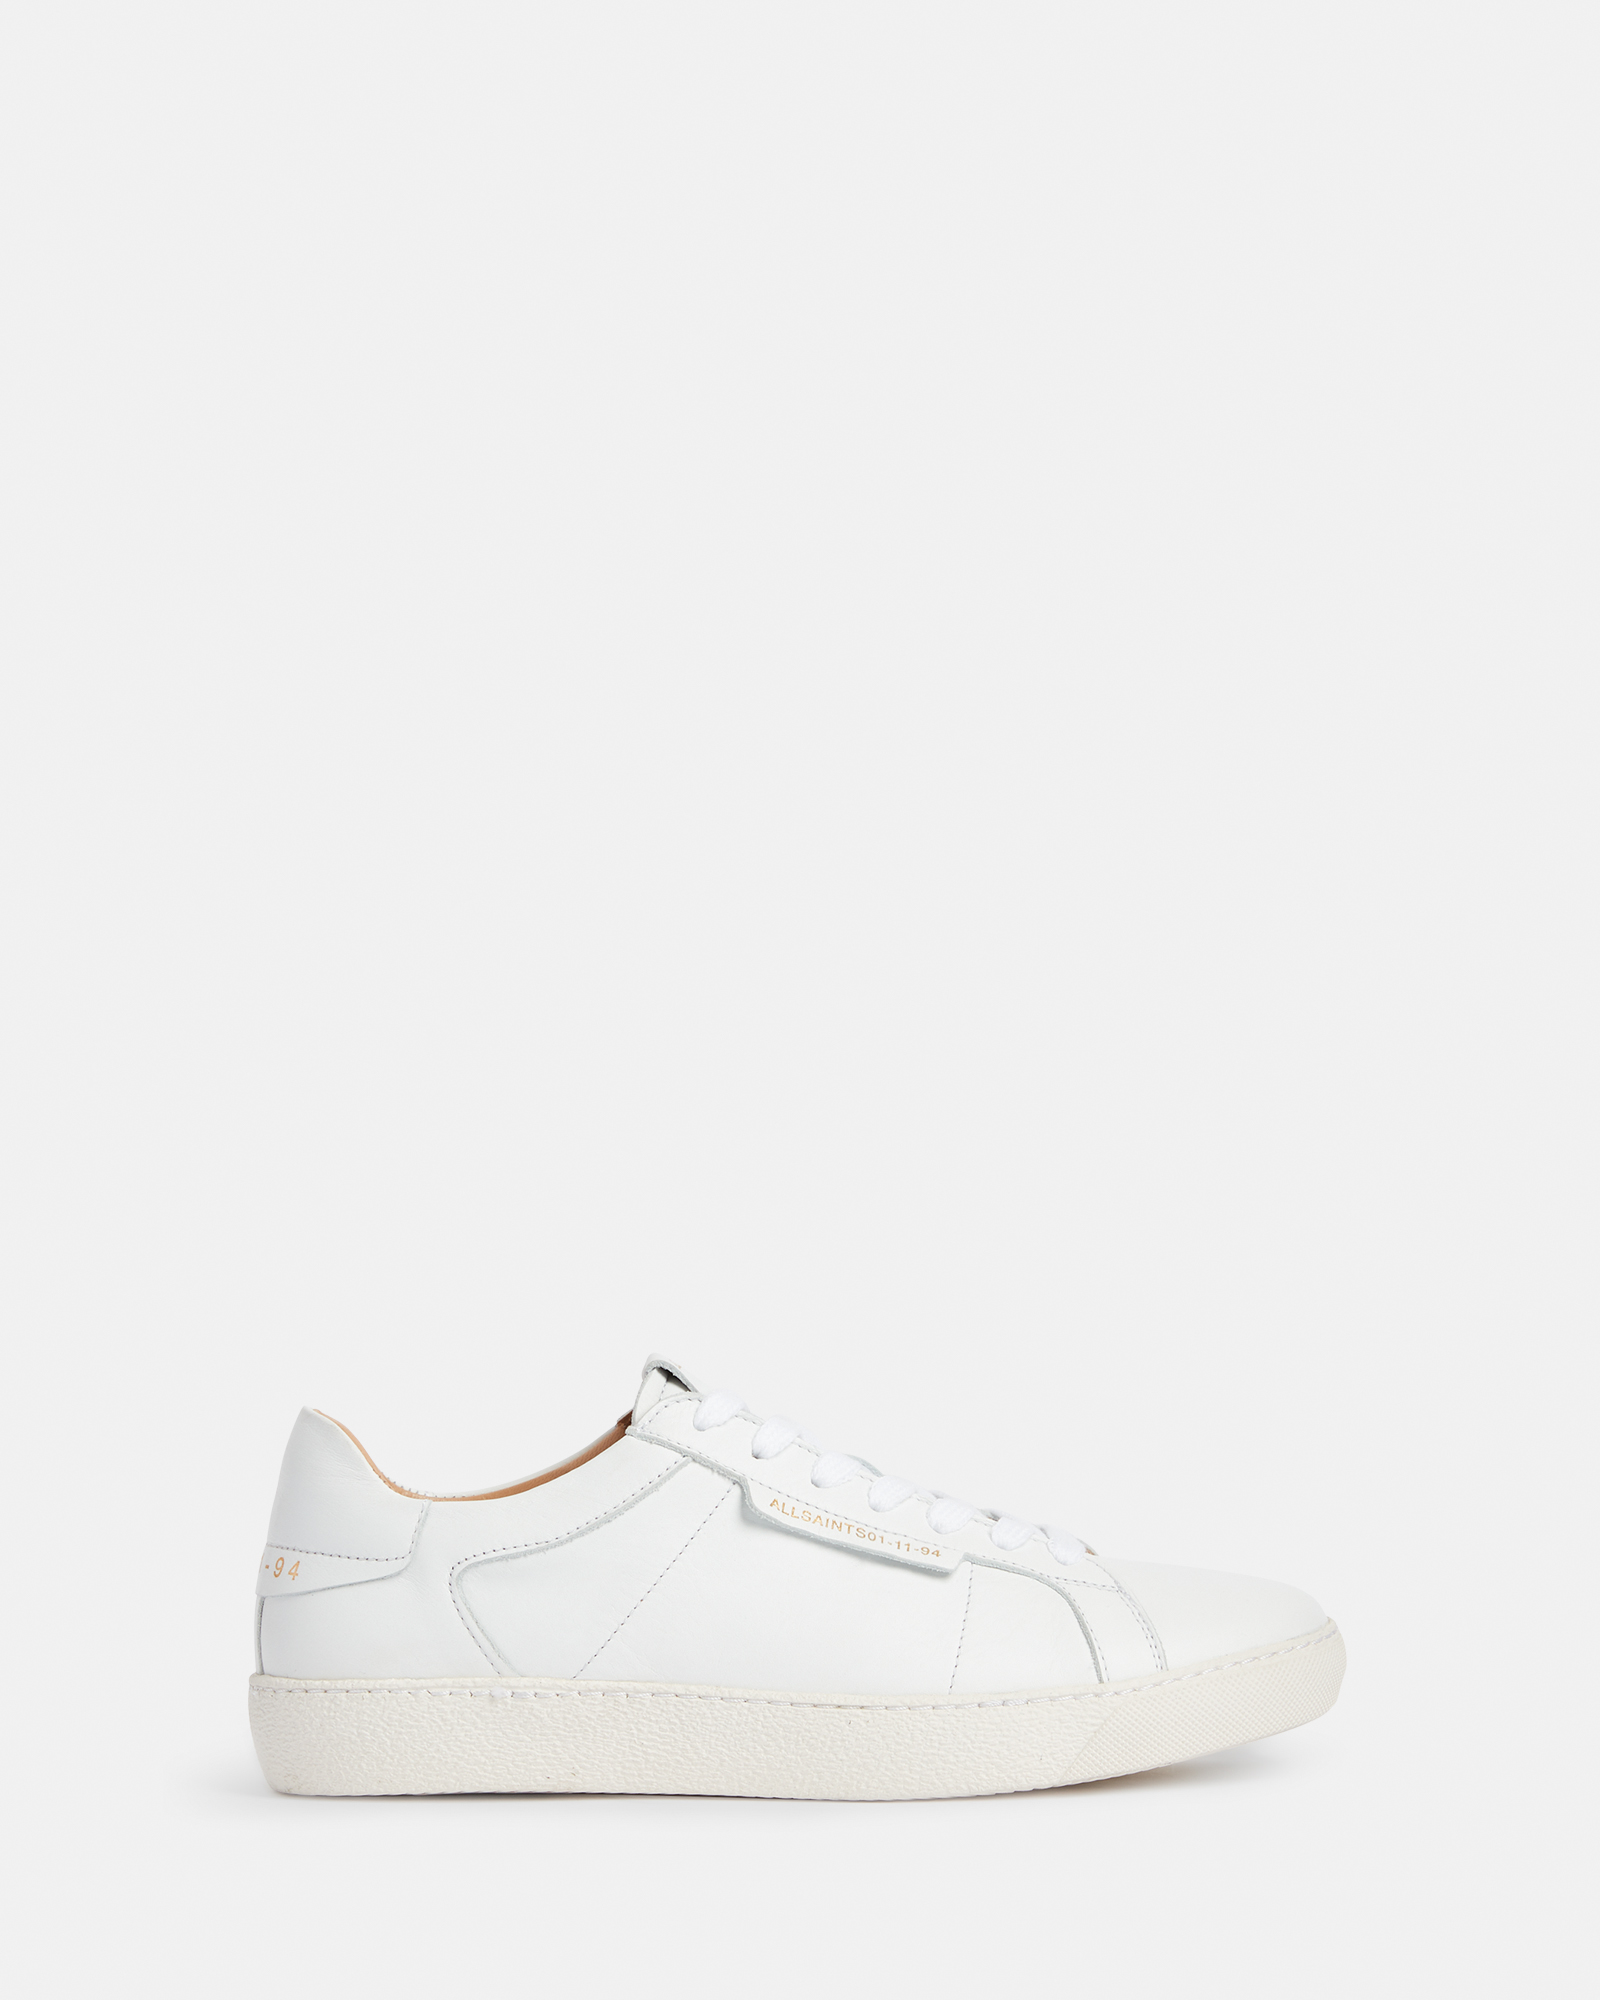 AllSaints Sheer Round Toe Leather Trainers,, White